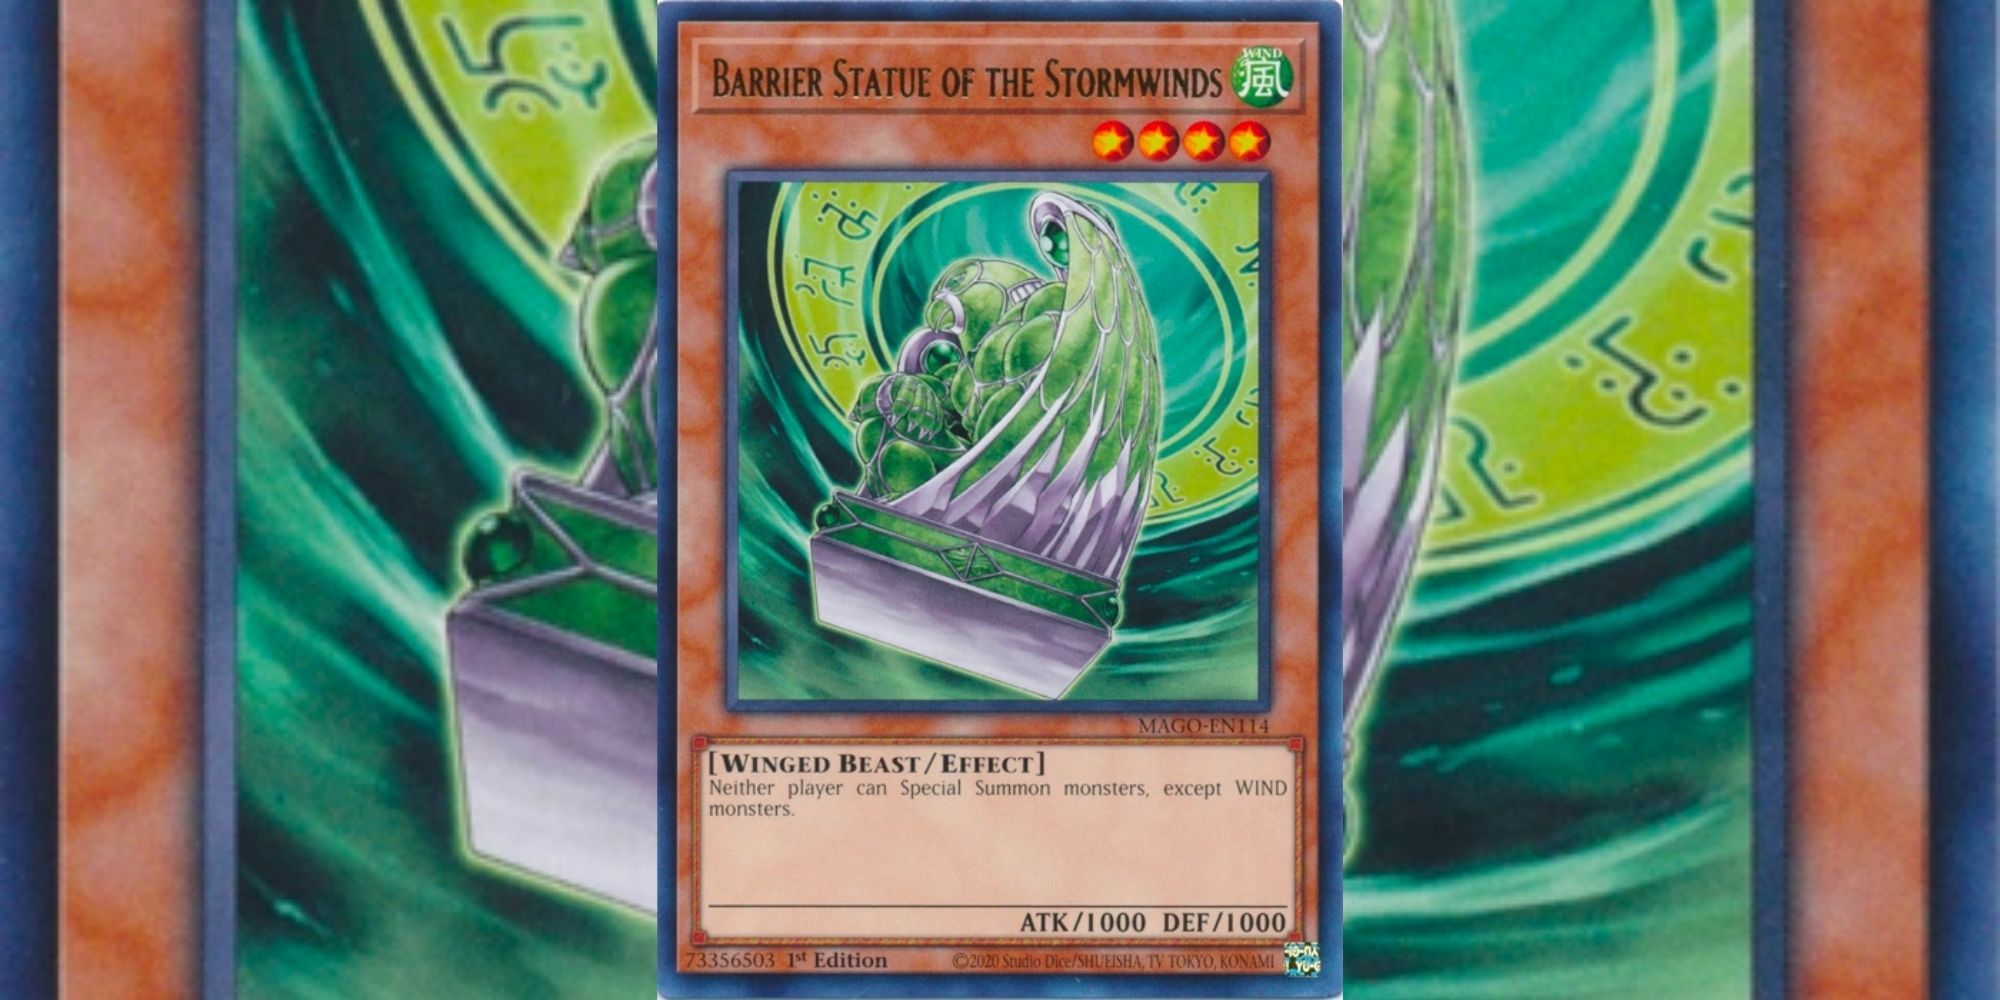 Barrier Statue Of The Stormwinds card in Yu-Gi-Oh!